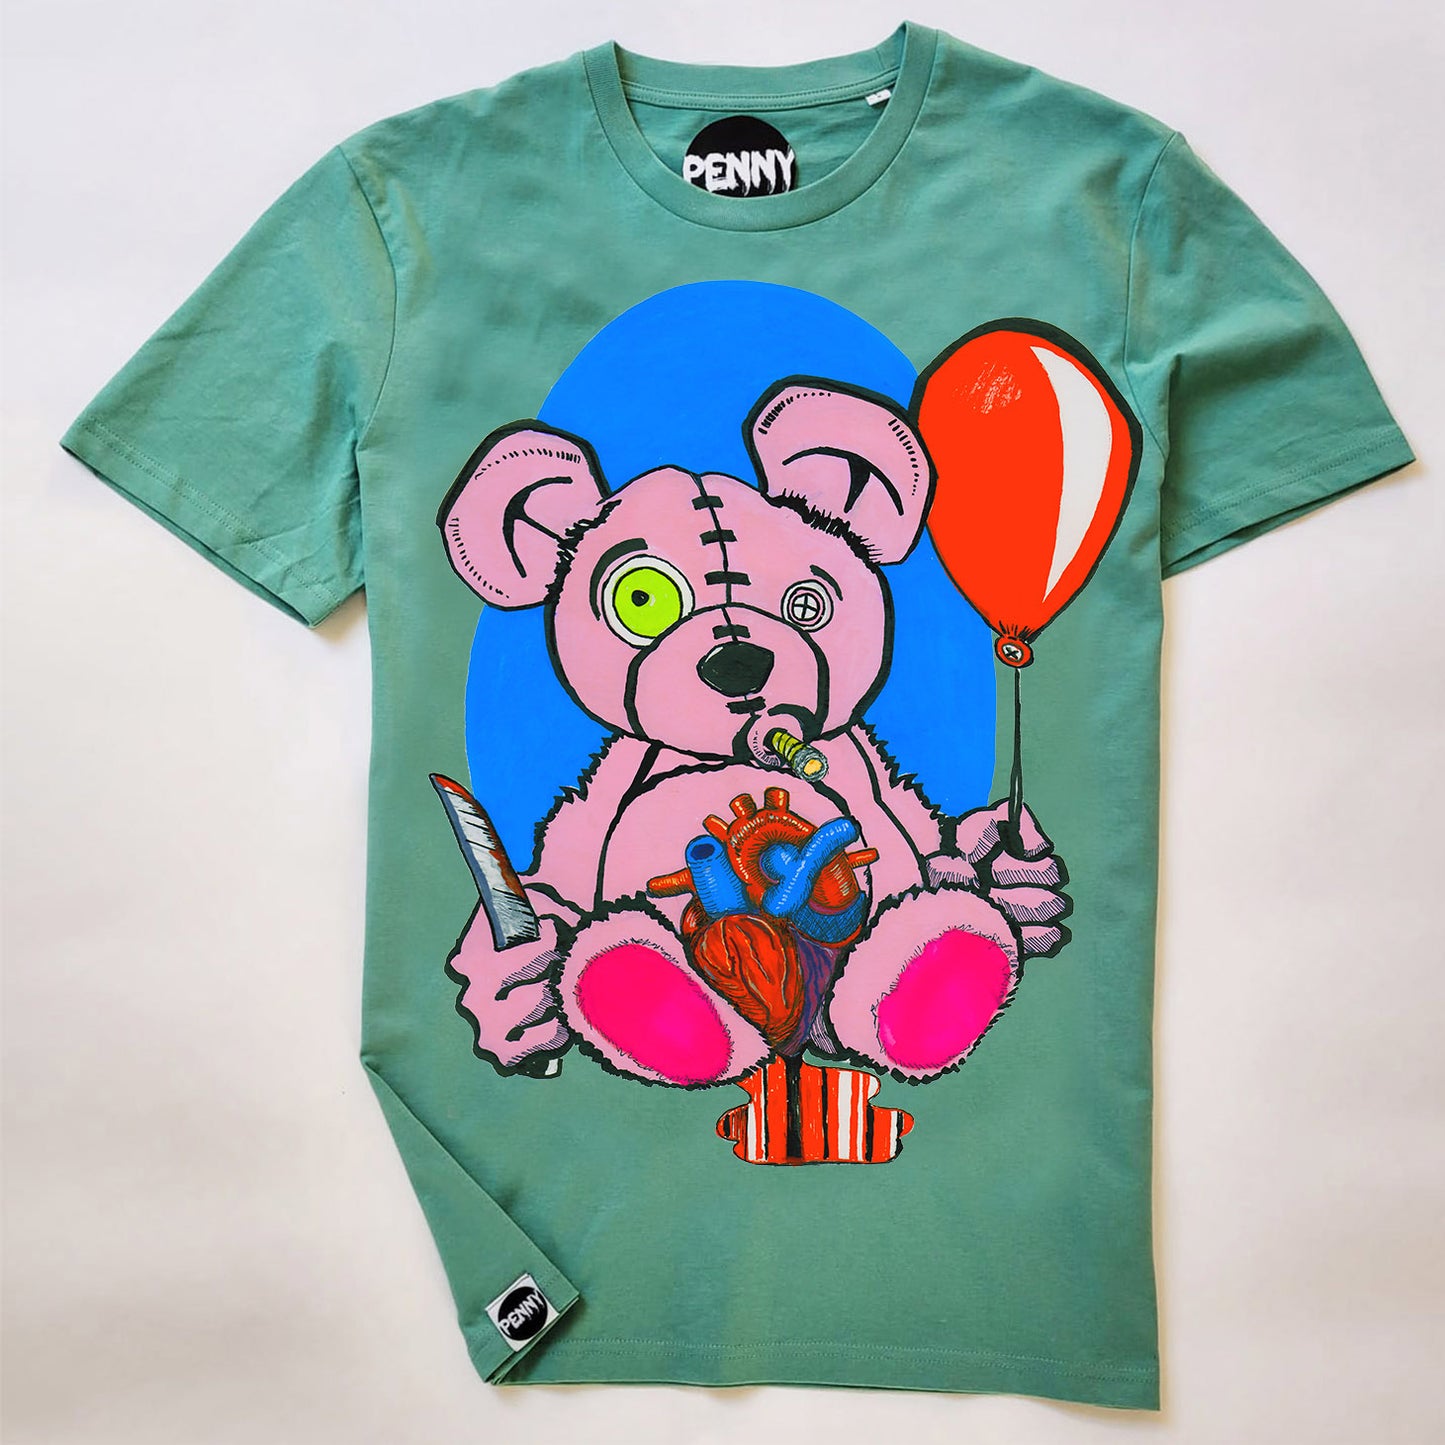 Bad Ted Heart T-shirt